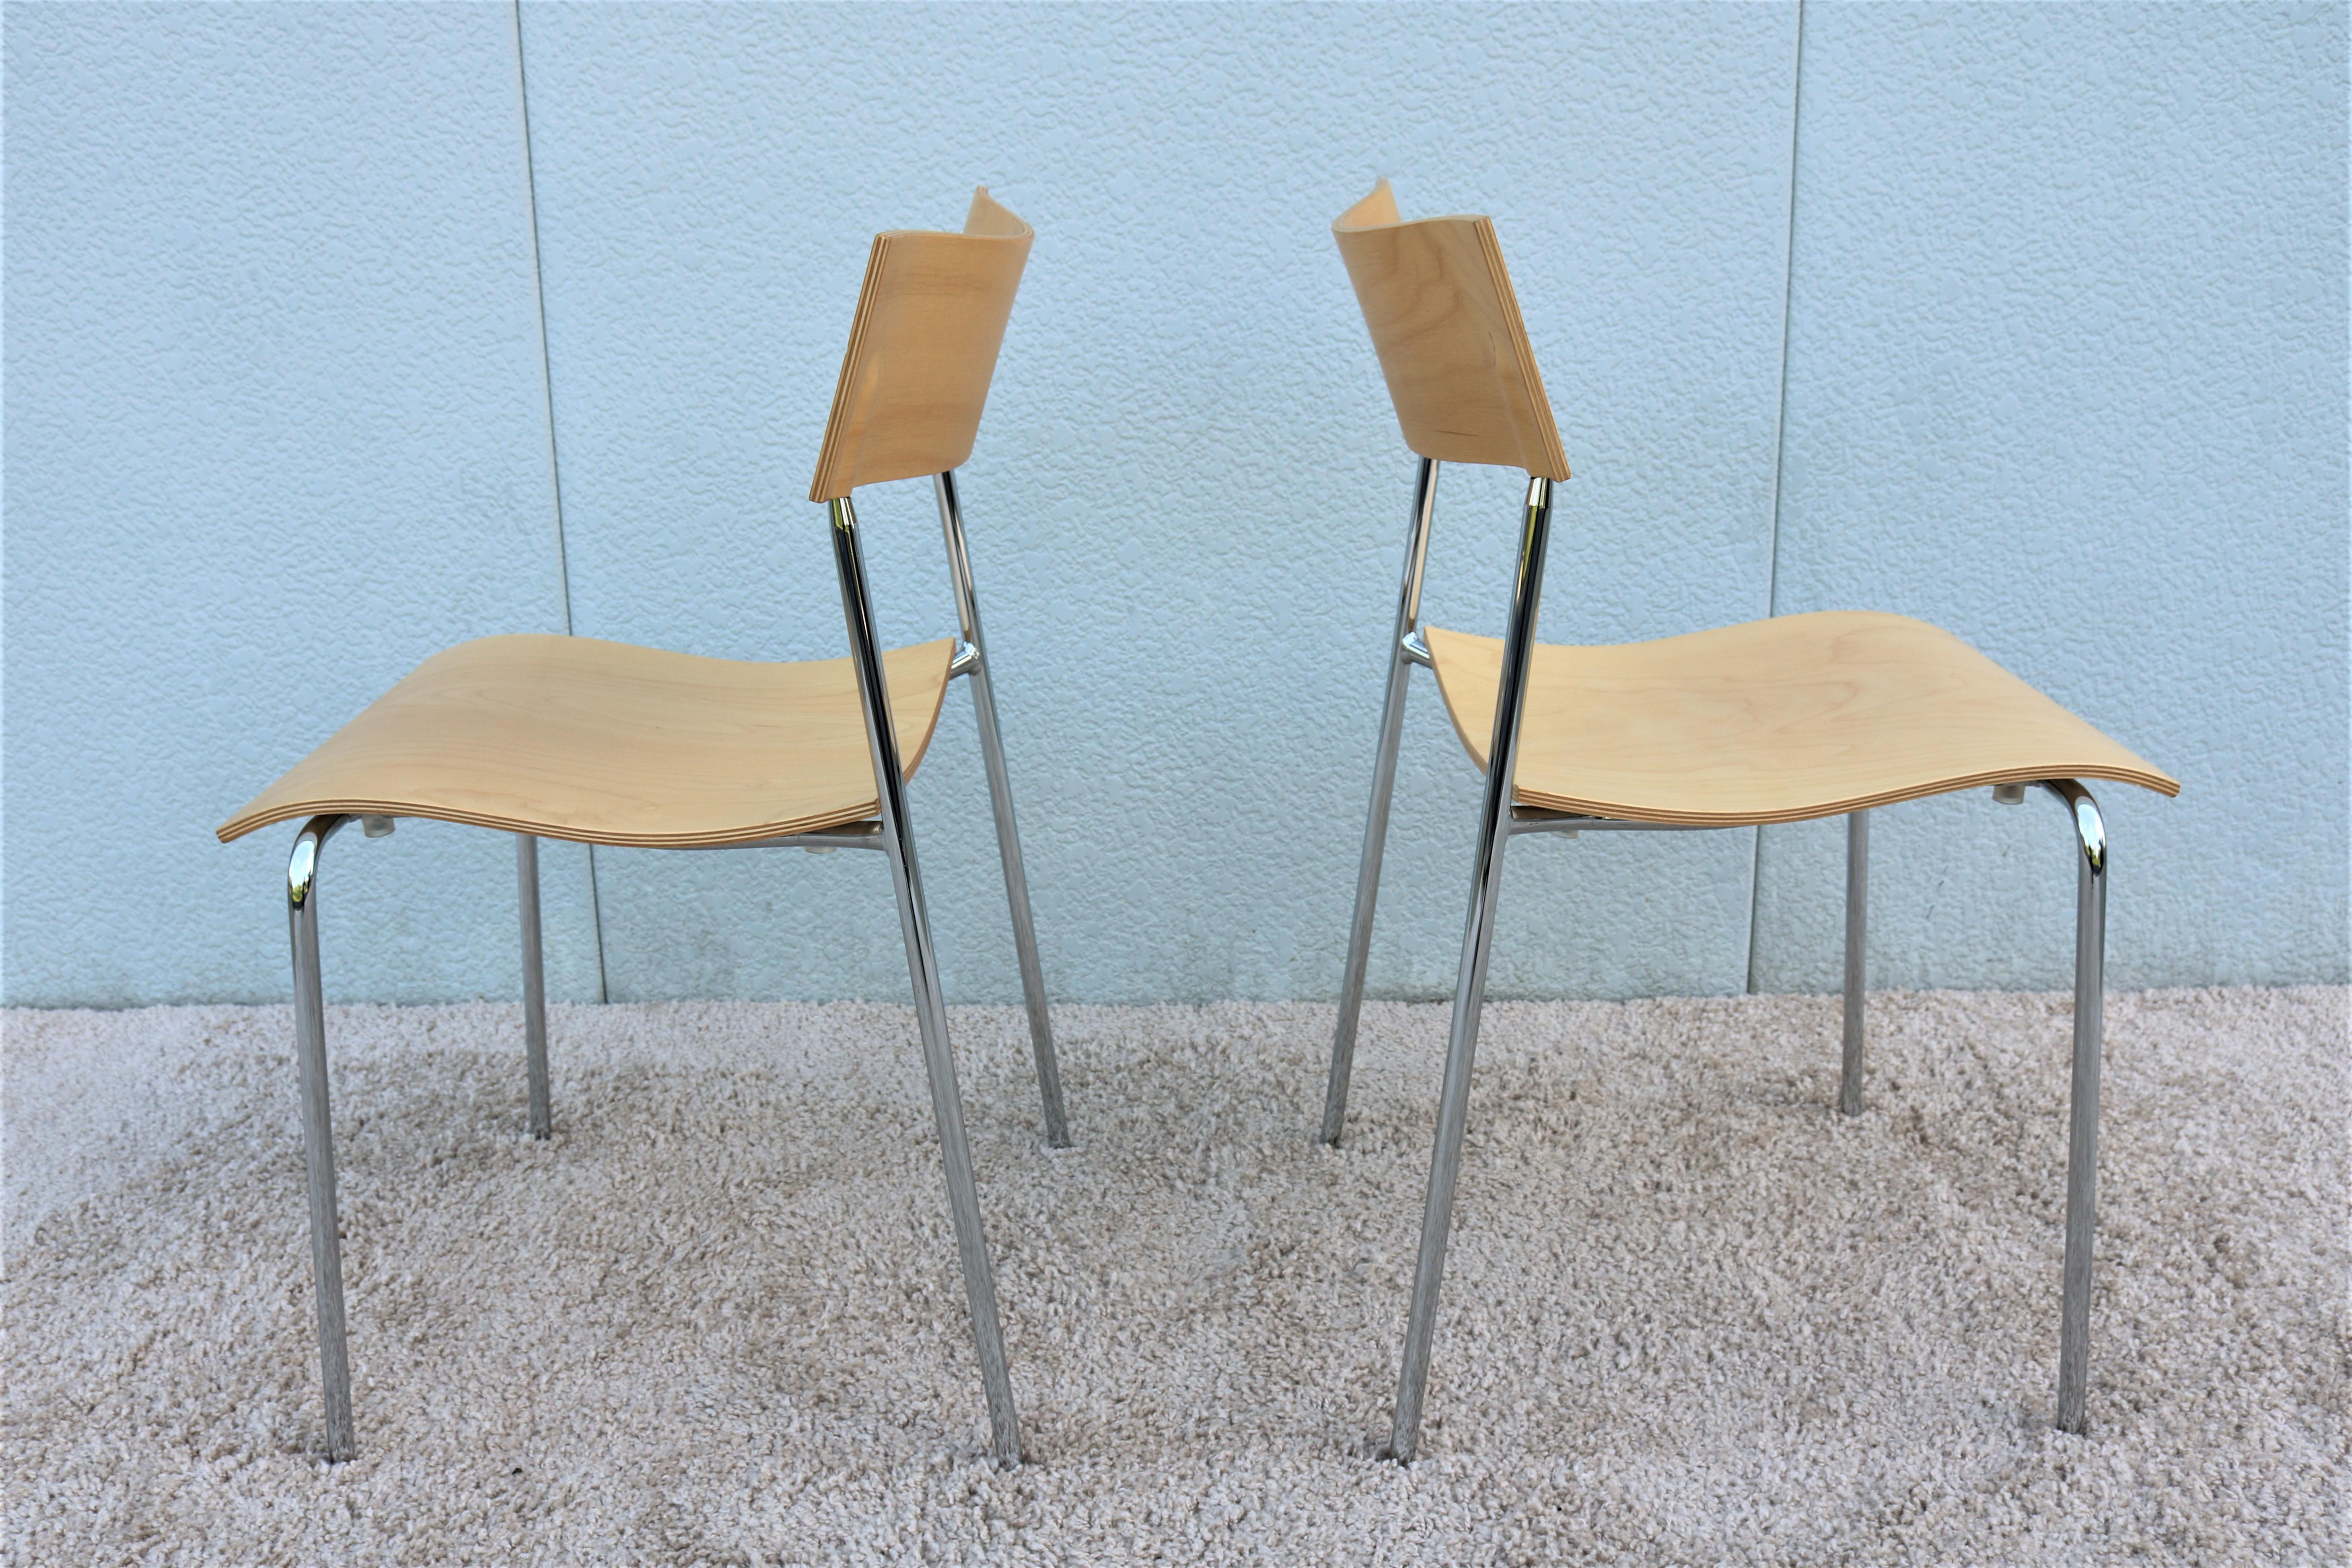 Steel 1992 Sweden Modern Campus AB Chairs by Johannes Foersom for Lammhults, a Pair For Sale